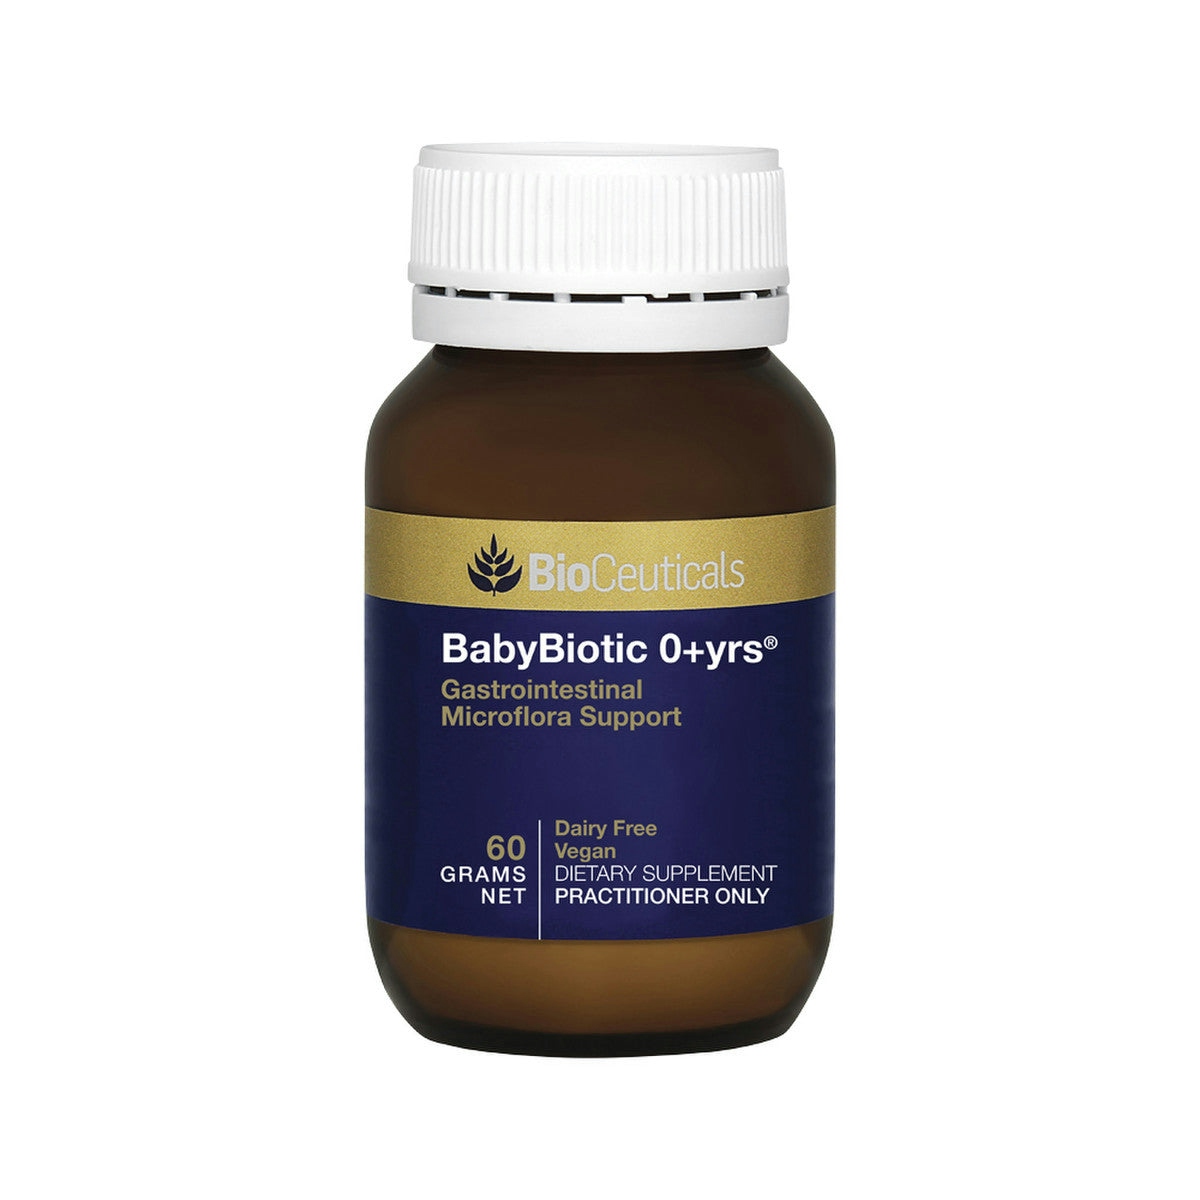 image of BioCeuticals BabyBiotic 0+yrs Oral Powder 60g on white background